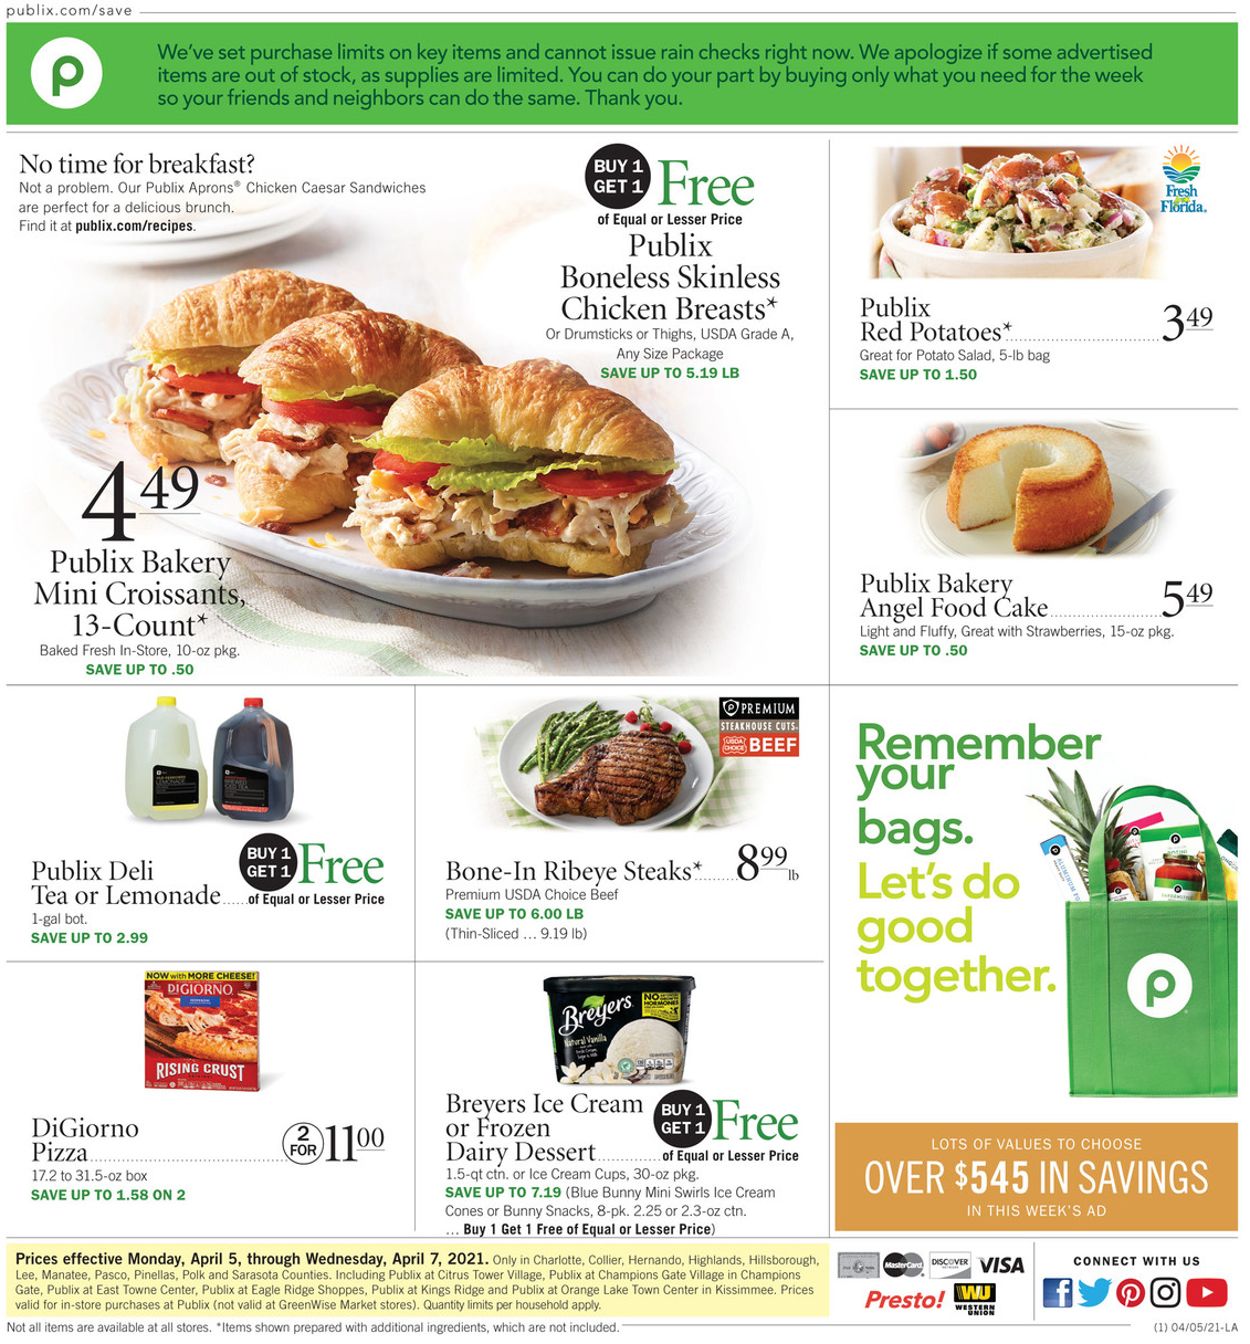 Publix Current weekly ad 04/05 - 04/07/2021 - frequent-ads.com